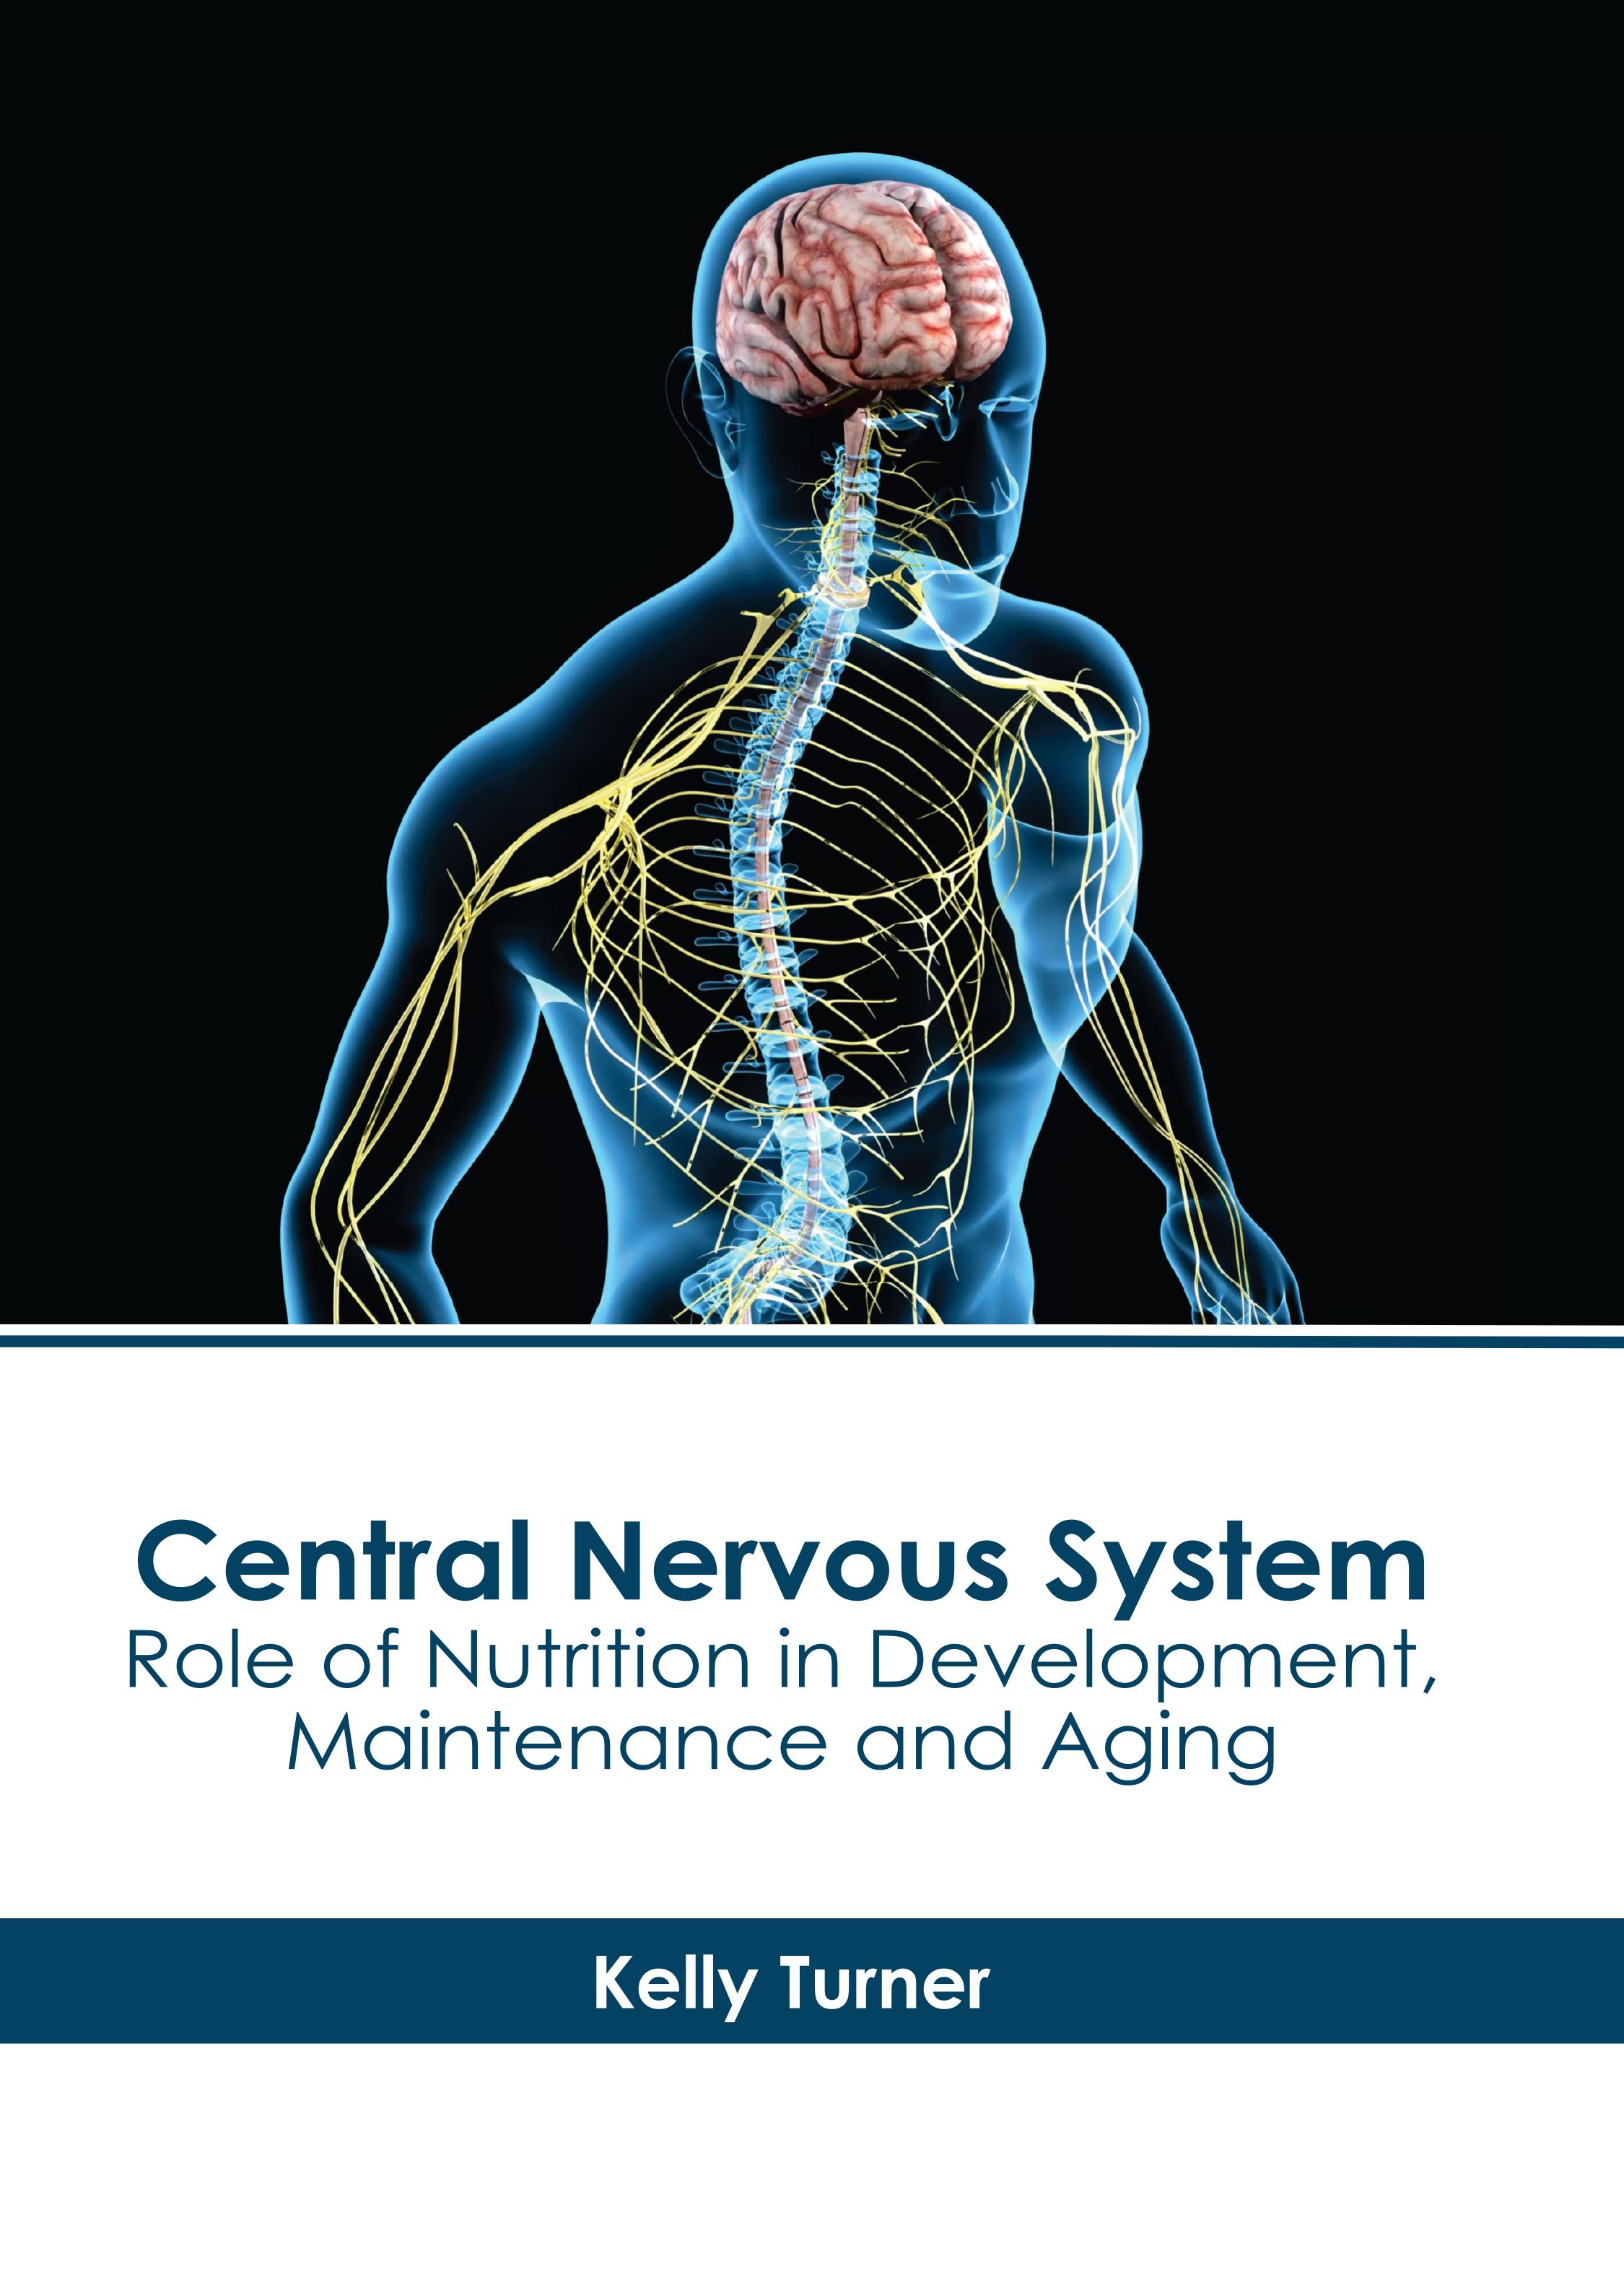 

exclusive-publishers/american-medical-publishers/central-nervous-system-role-of-nutrition-in-development-maintenance-and-aging-9781639276264